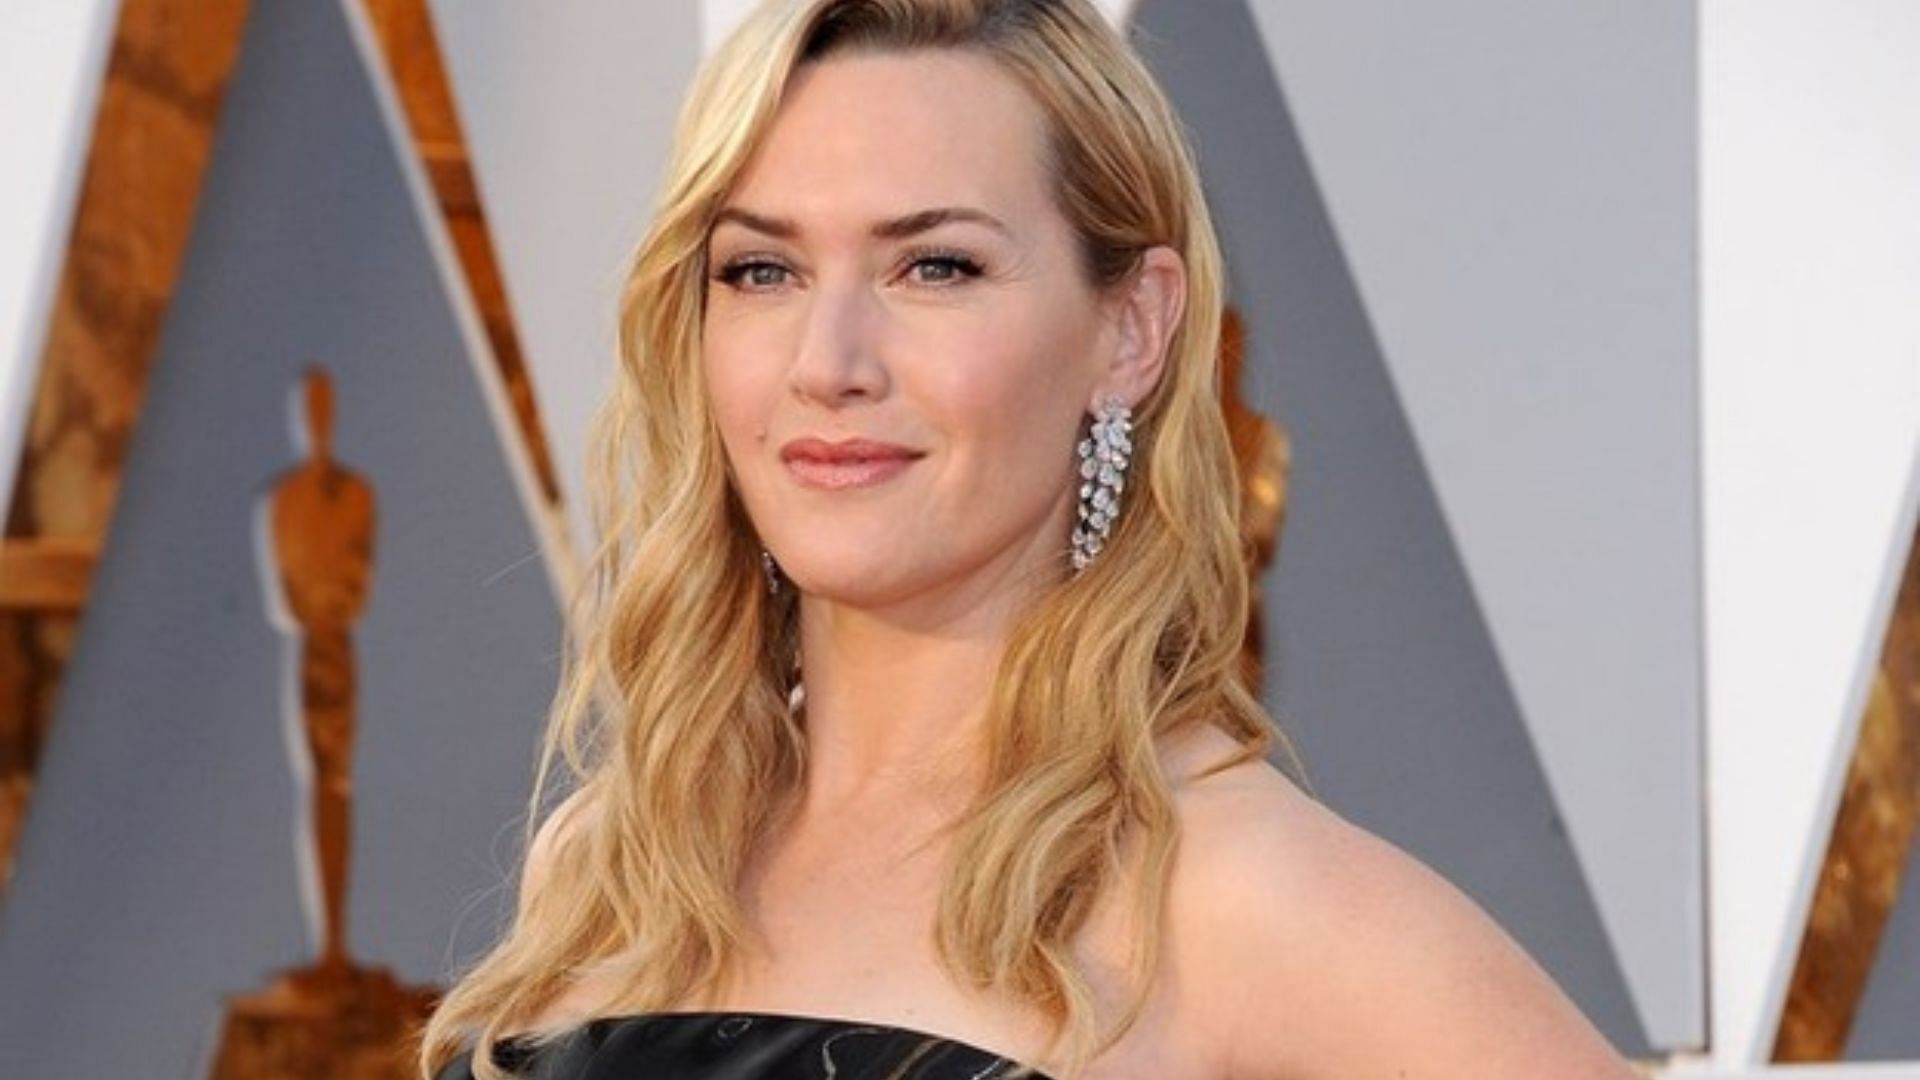 A still of Kate Winslet (Image Via Rotten Tomatoes)